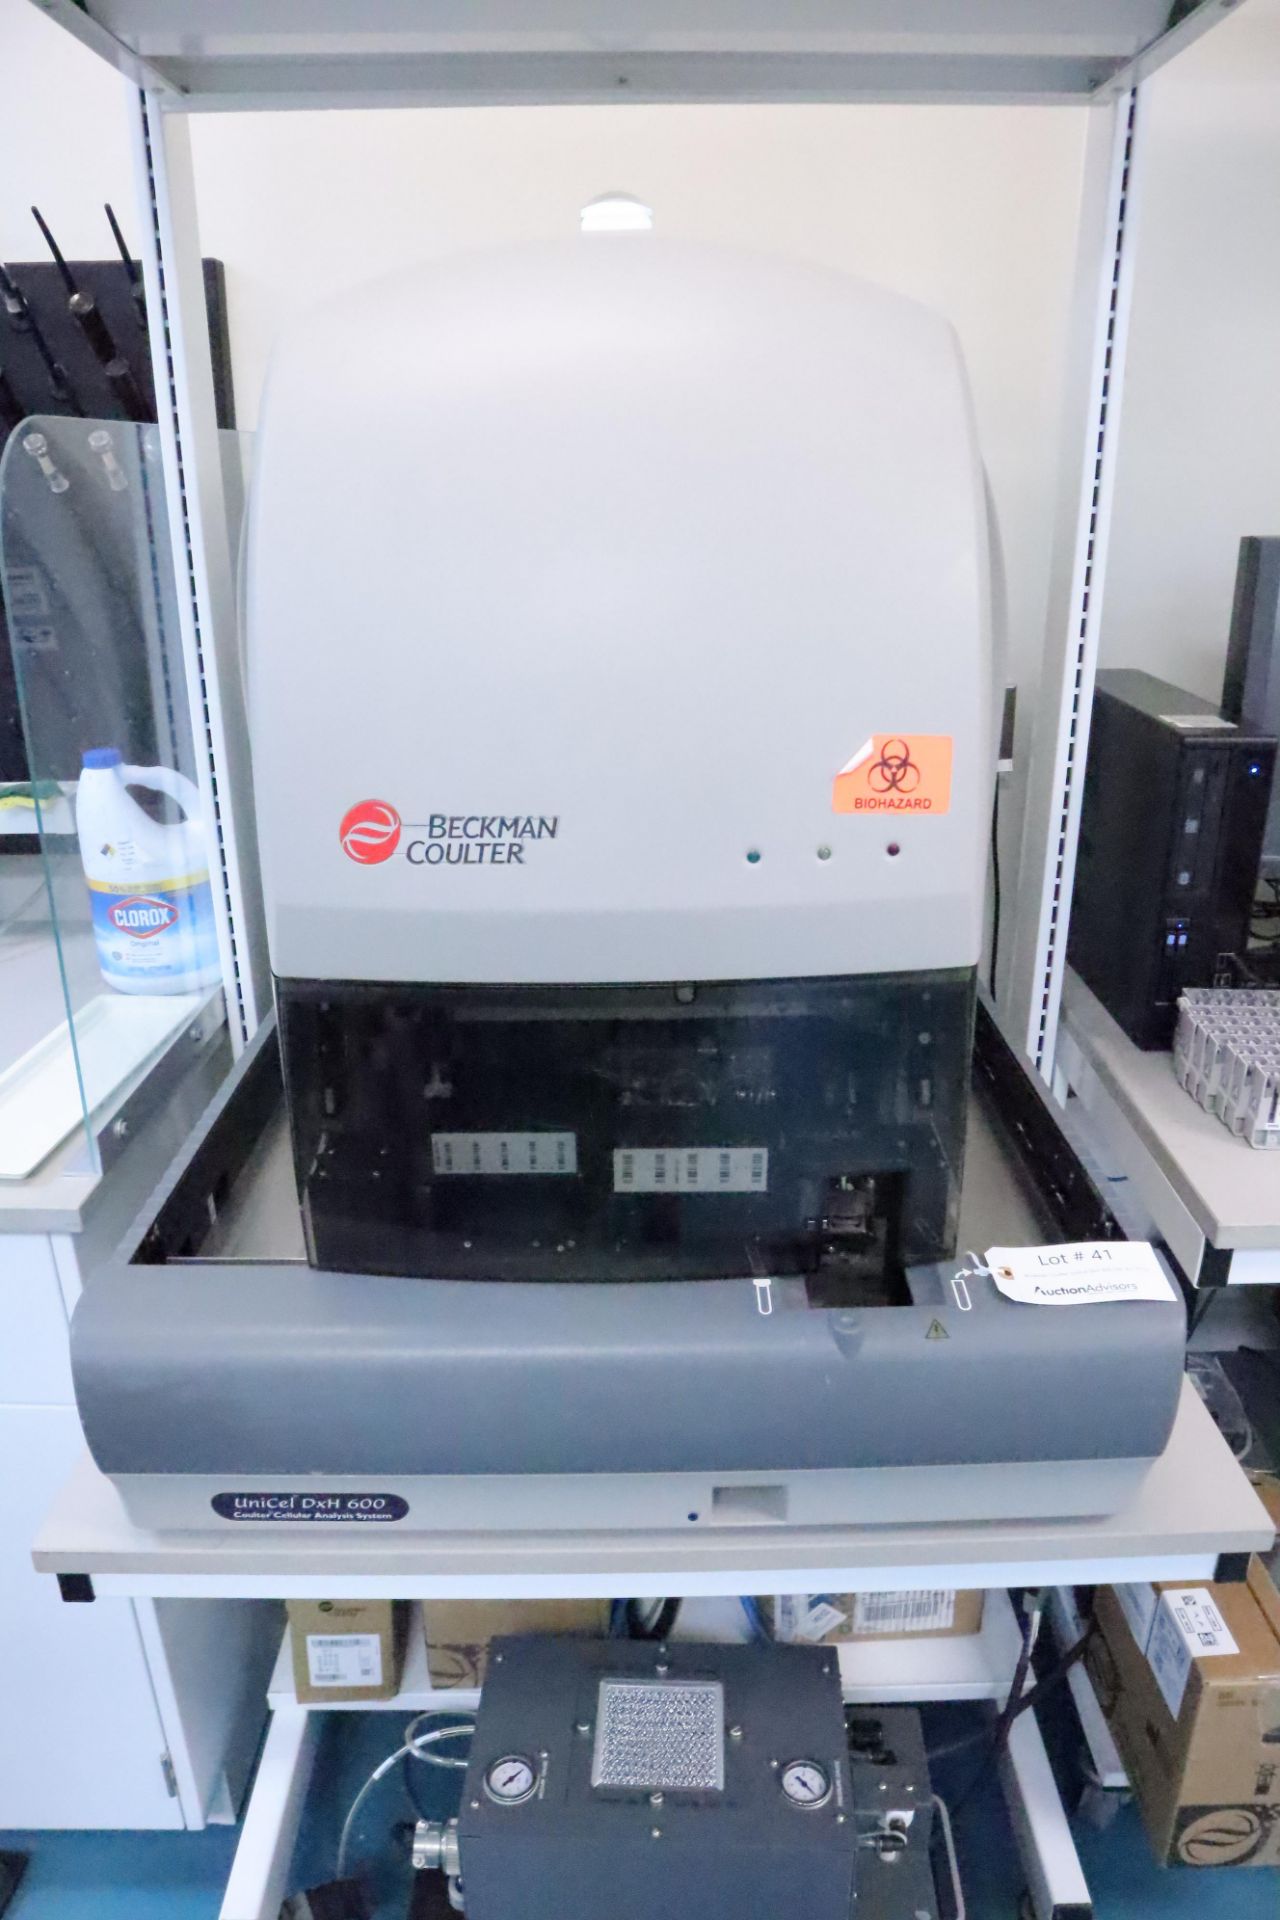 Beckman Coulter UniCel DxH 600 with pump, computer, fluid and tubes (SN: AY17713)